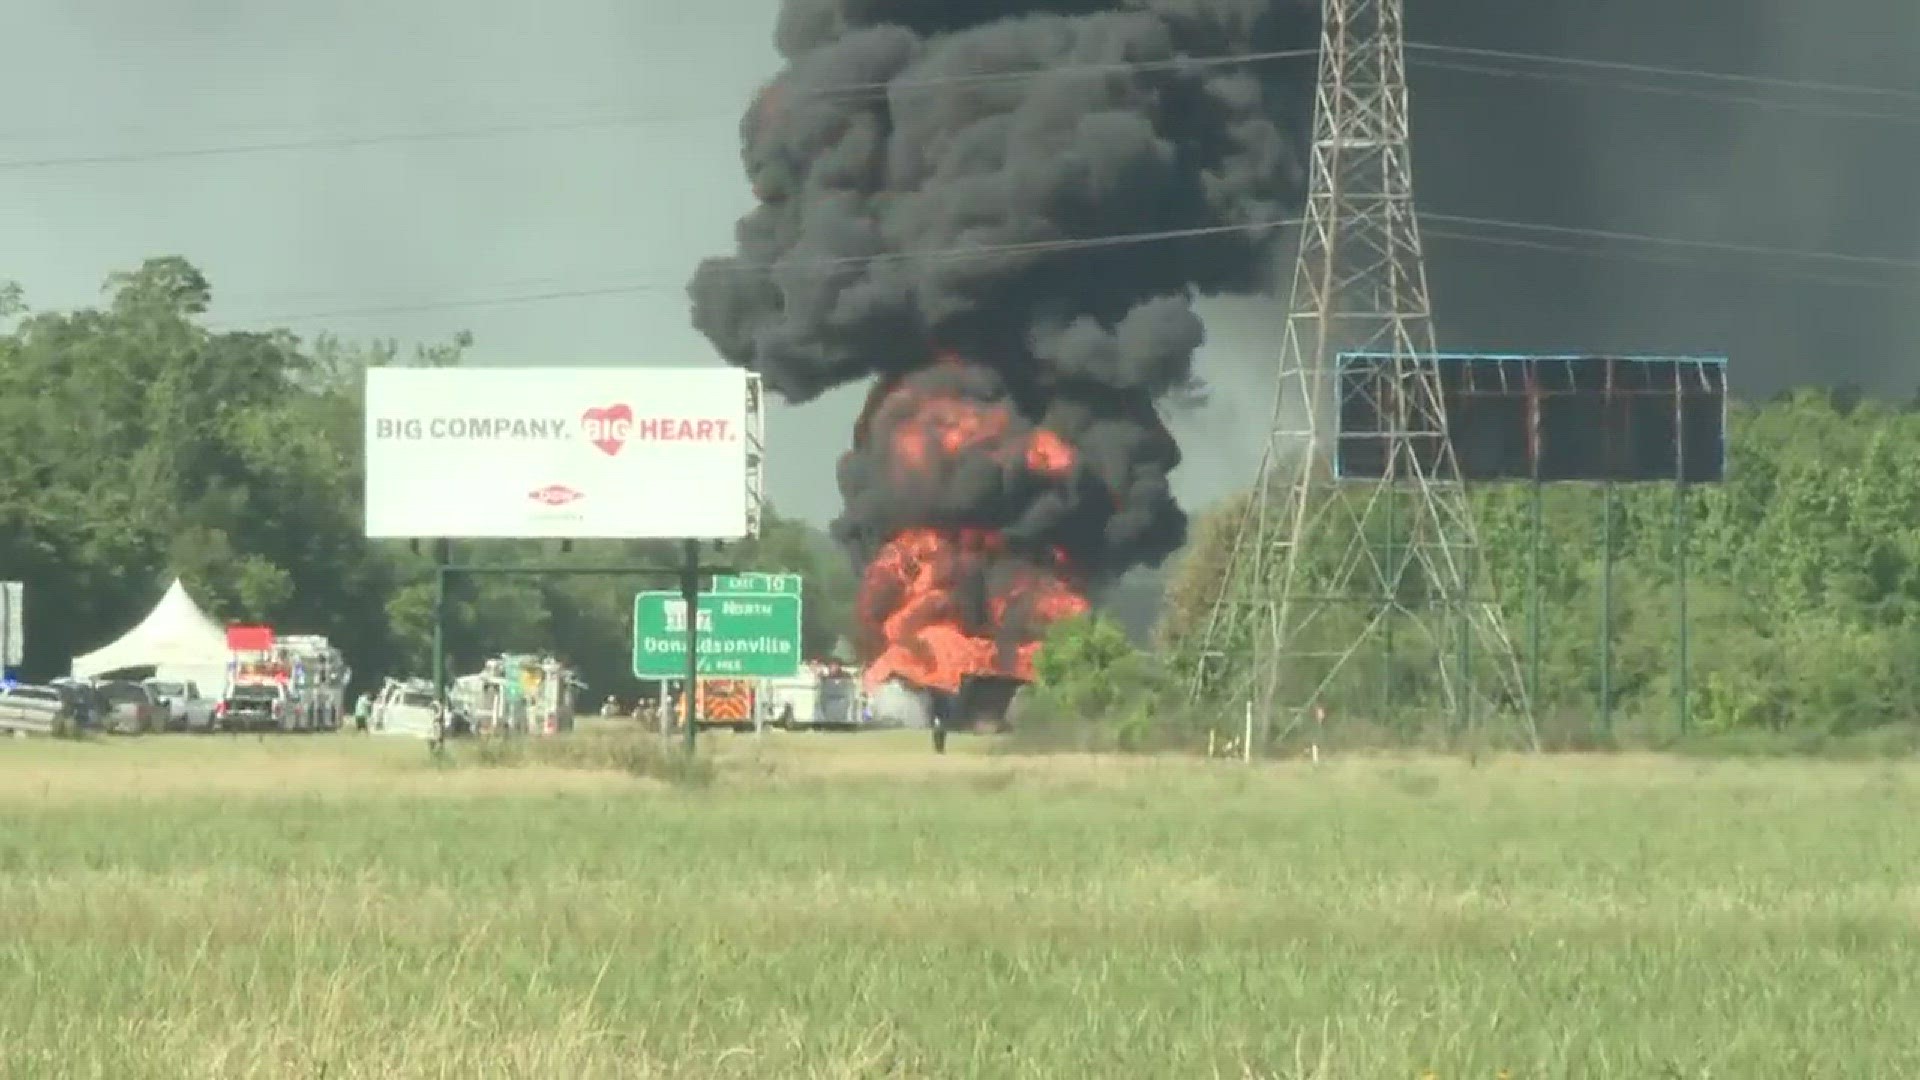 Louisiana State Police confirmed one person has died and another is being treated for serious injuries after a fiery accident on I-310 Thursday morning.